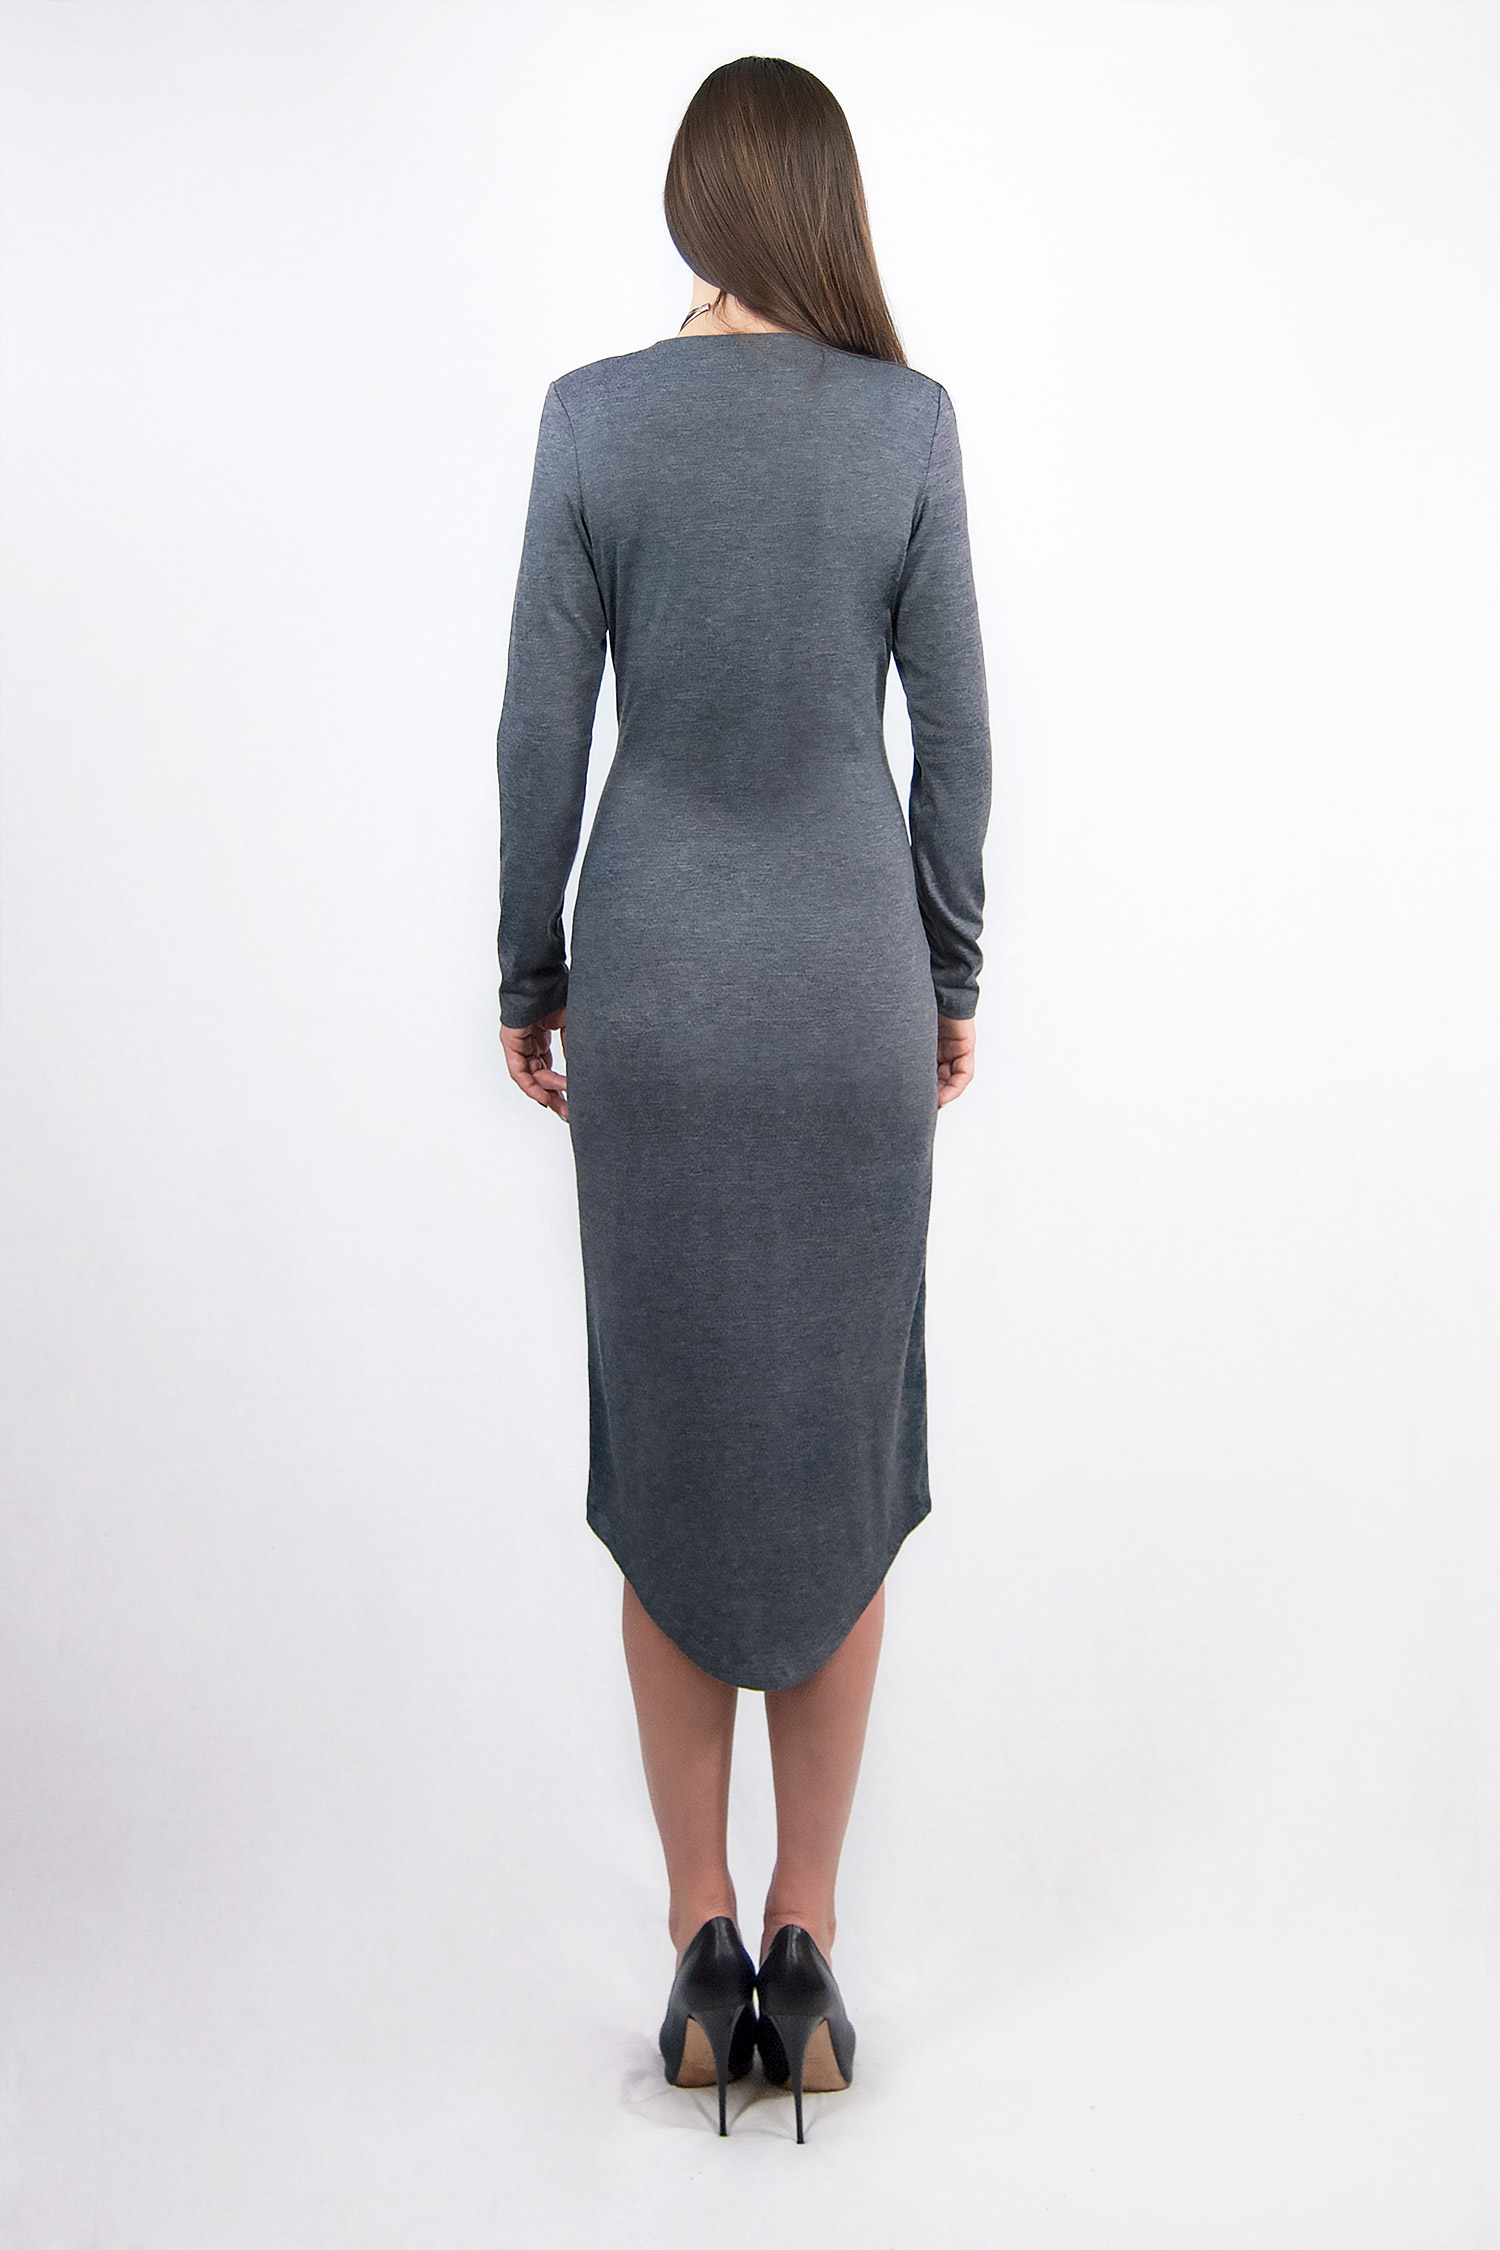 Gray dress with drapery in front